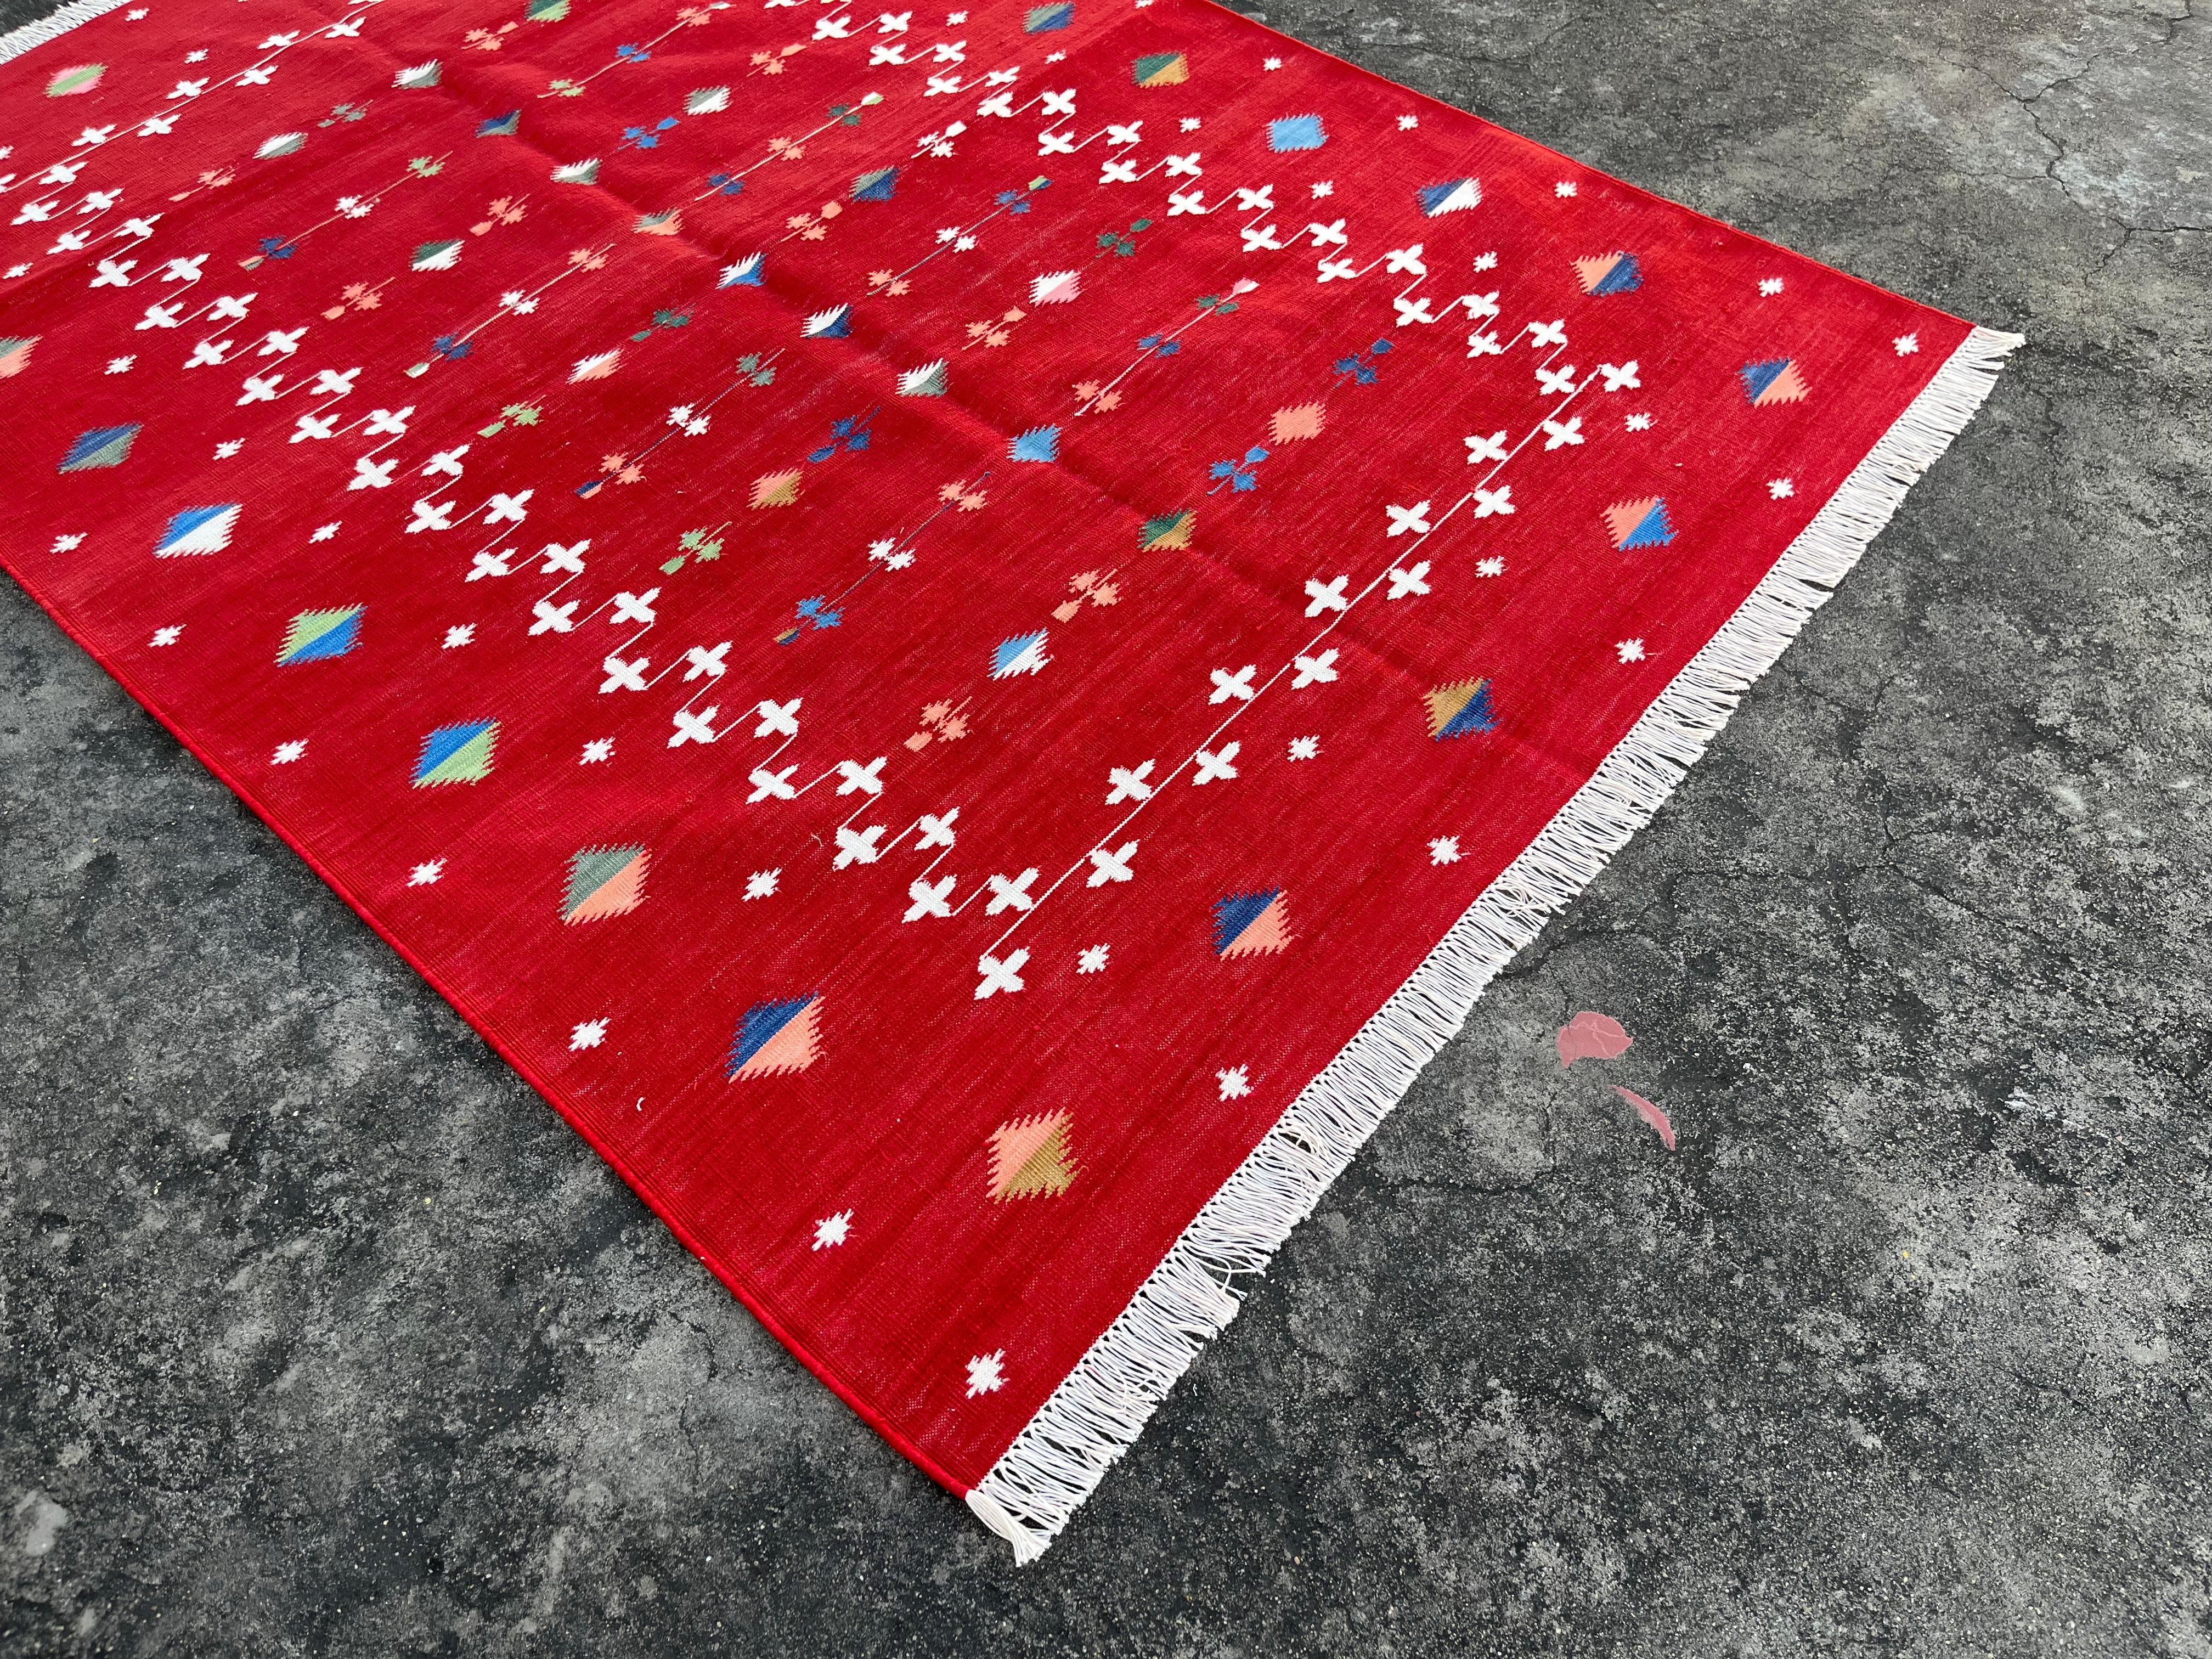 Indian Handmade Cotton Area Flat Weave Rug, 4x6 Red And White Shooting Star Dhurrie Rug For Sale